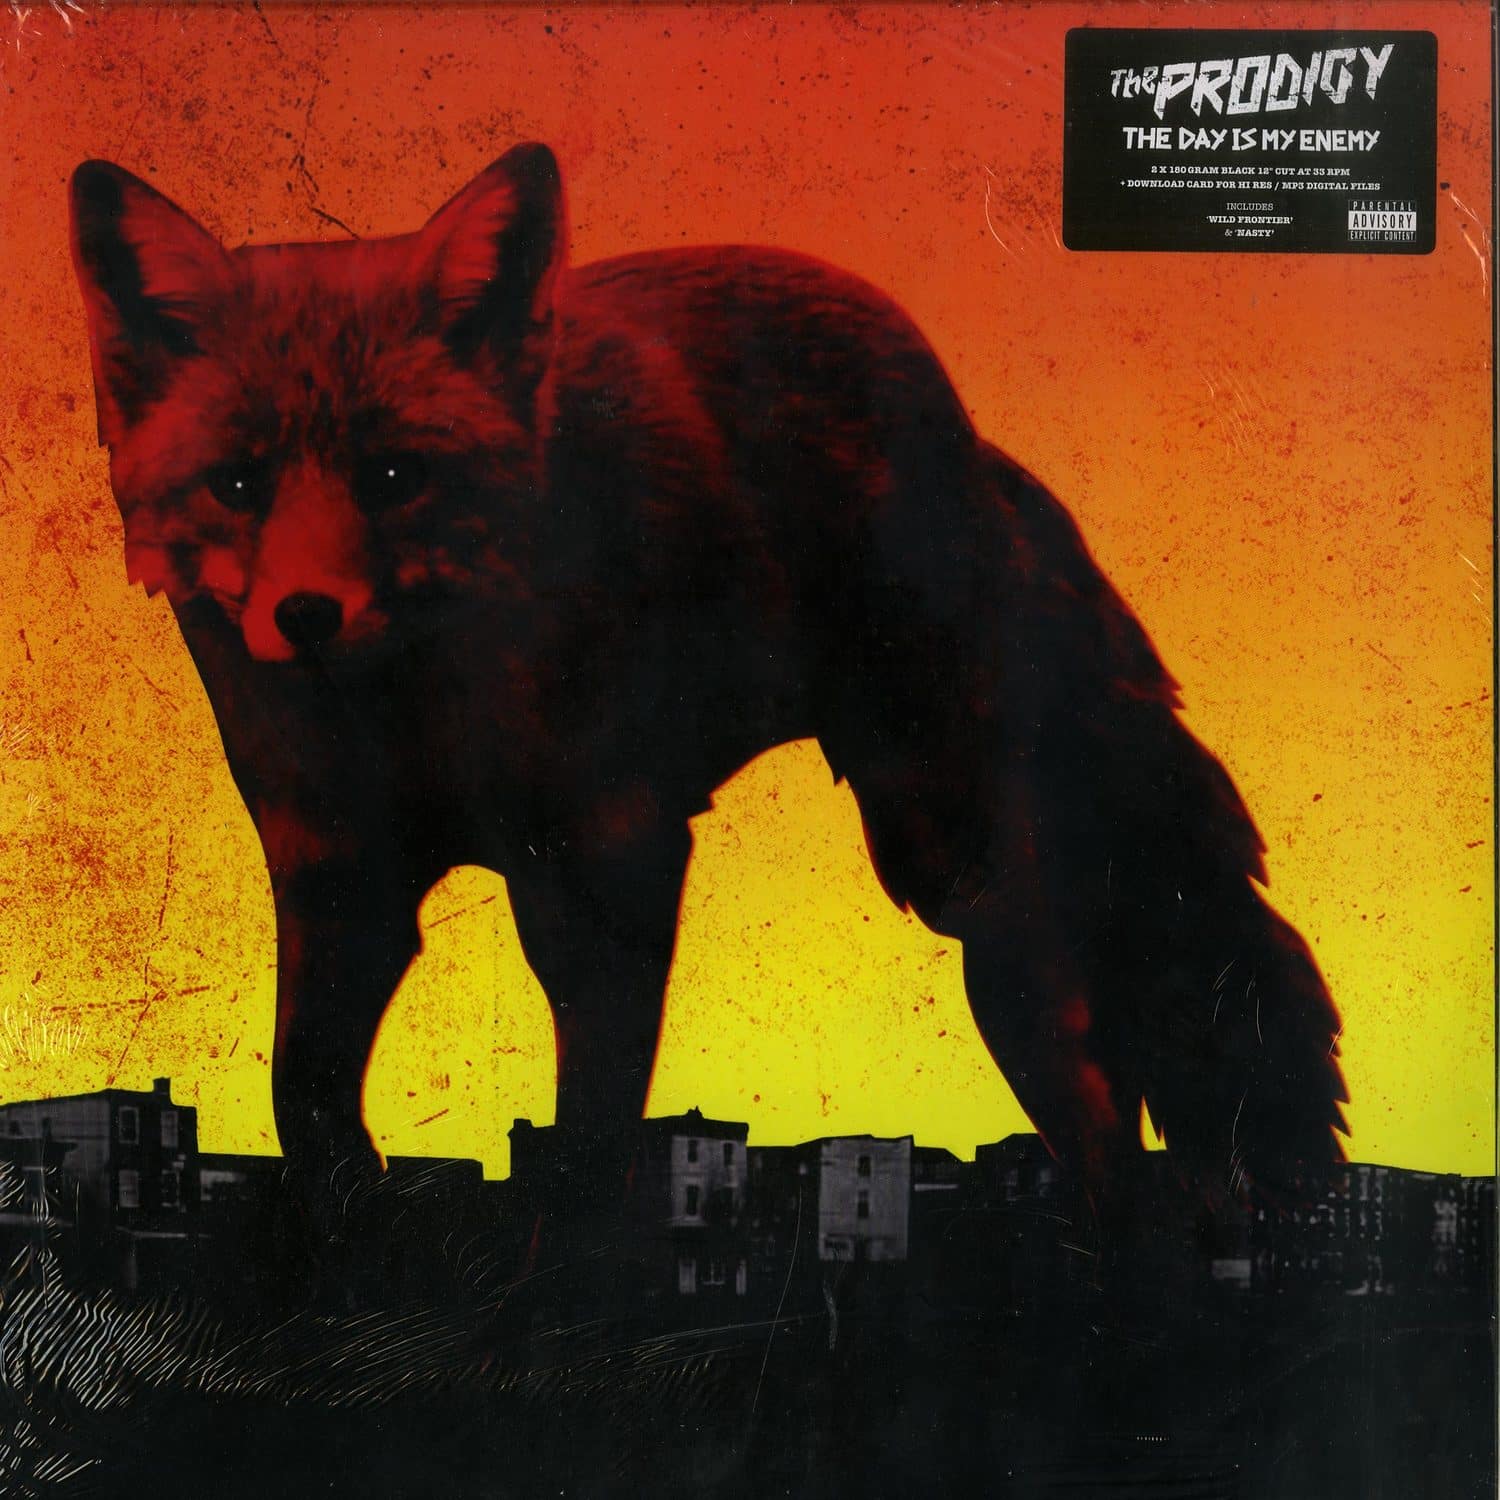 The Prodigy - THE DAY IS MY ENEMY